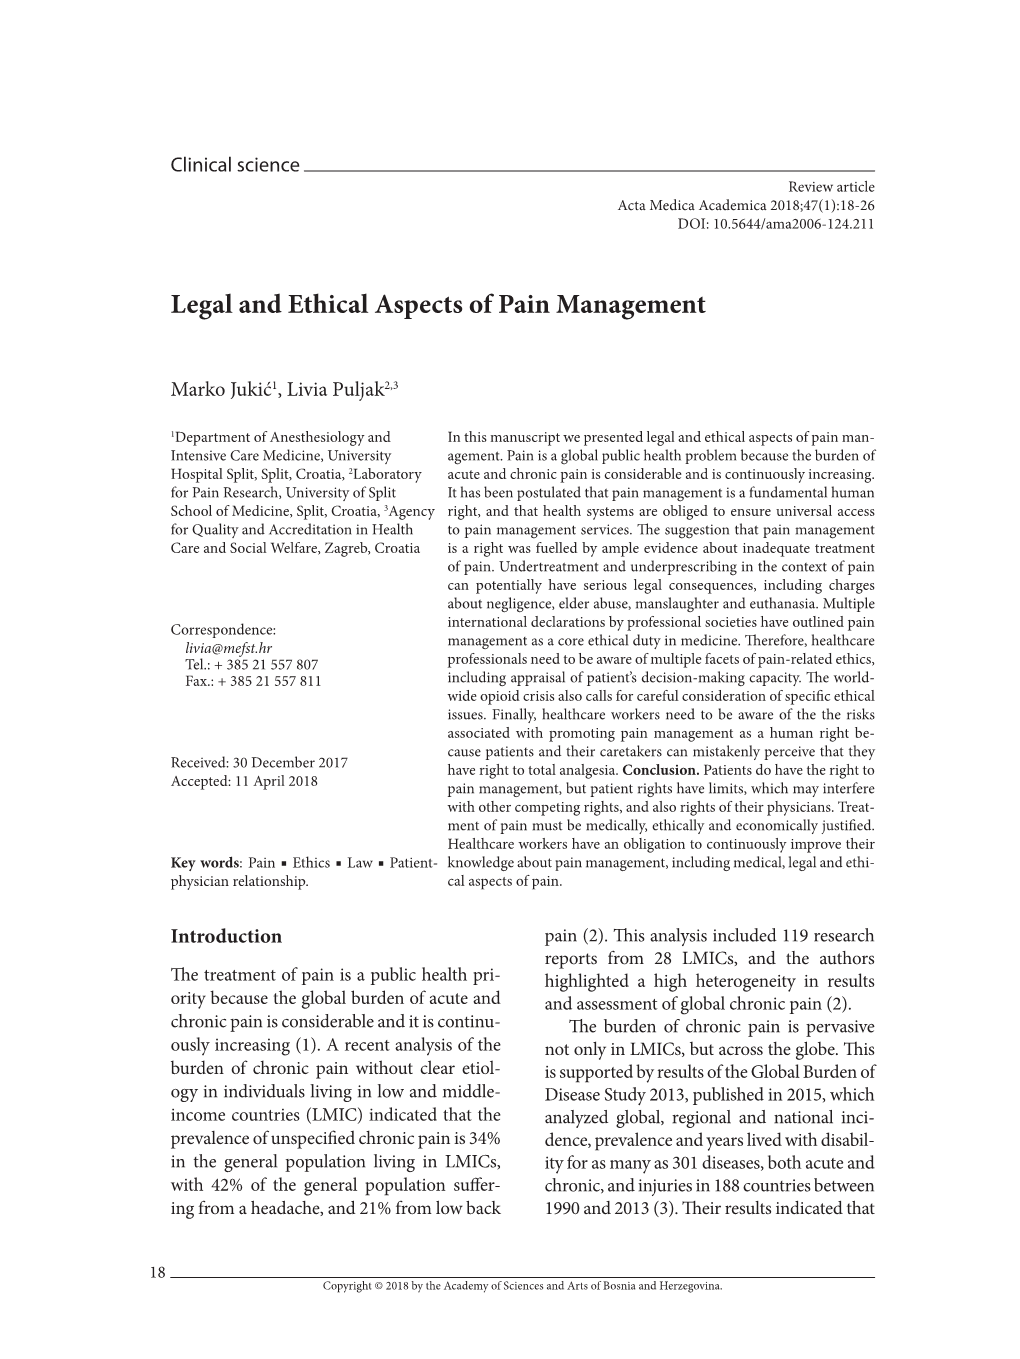 Legal and Ethical Aspects of Pain Management